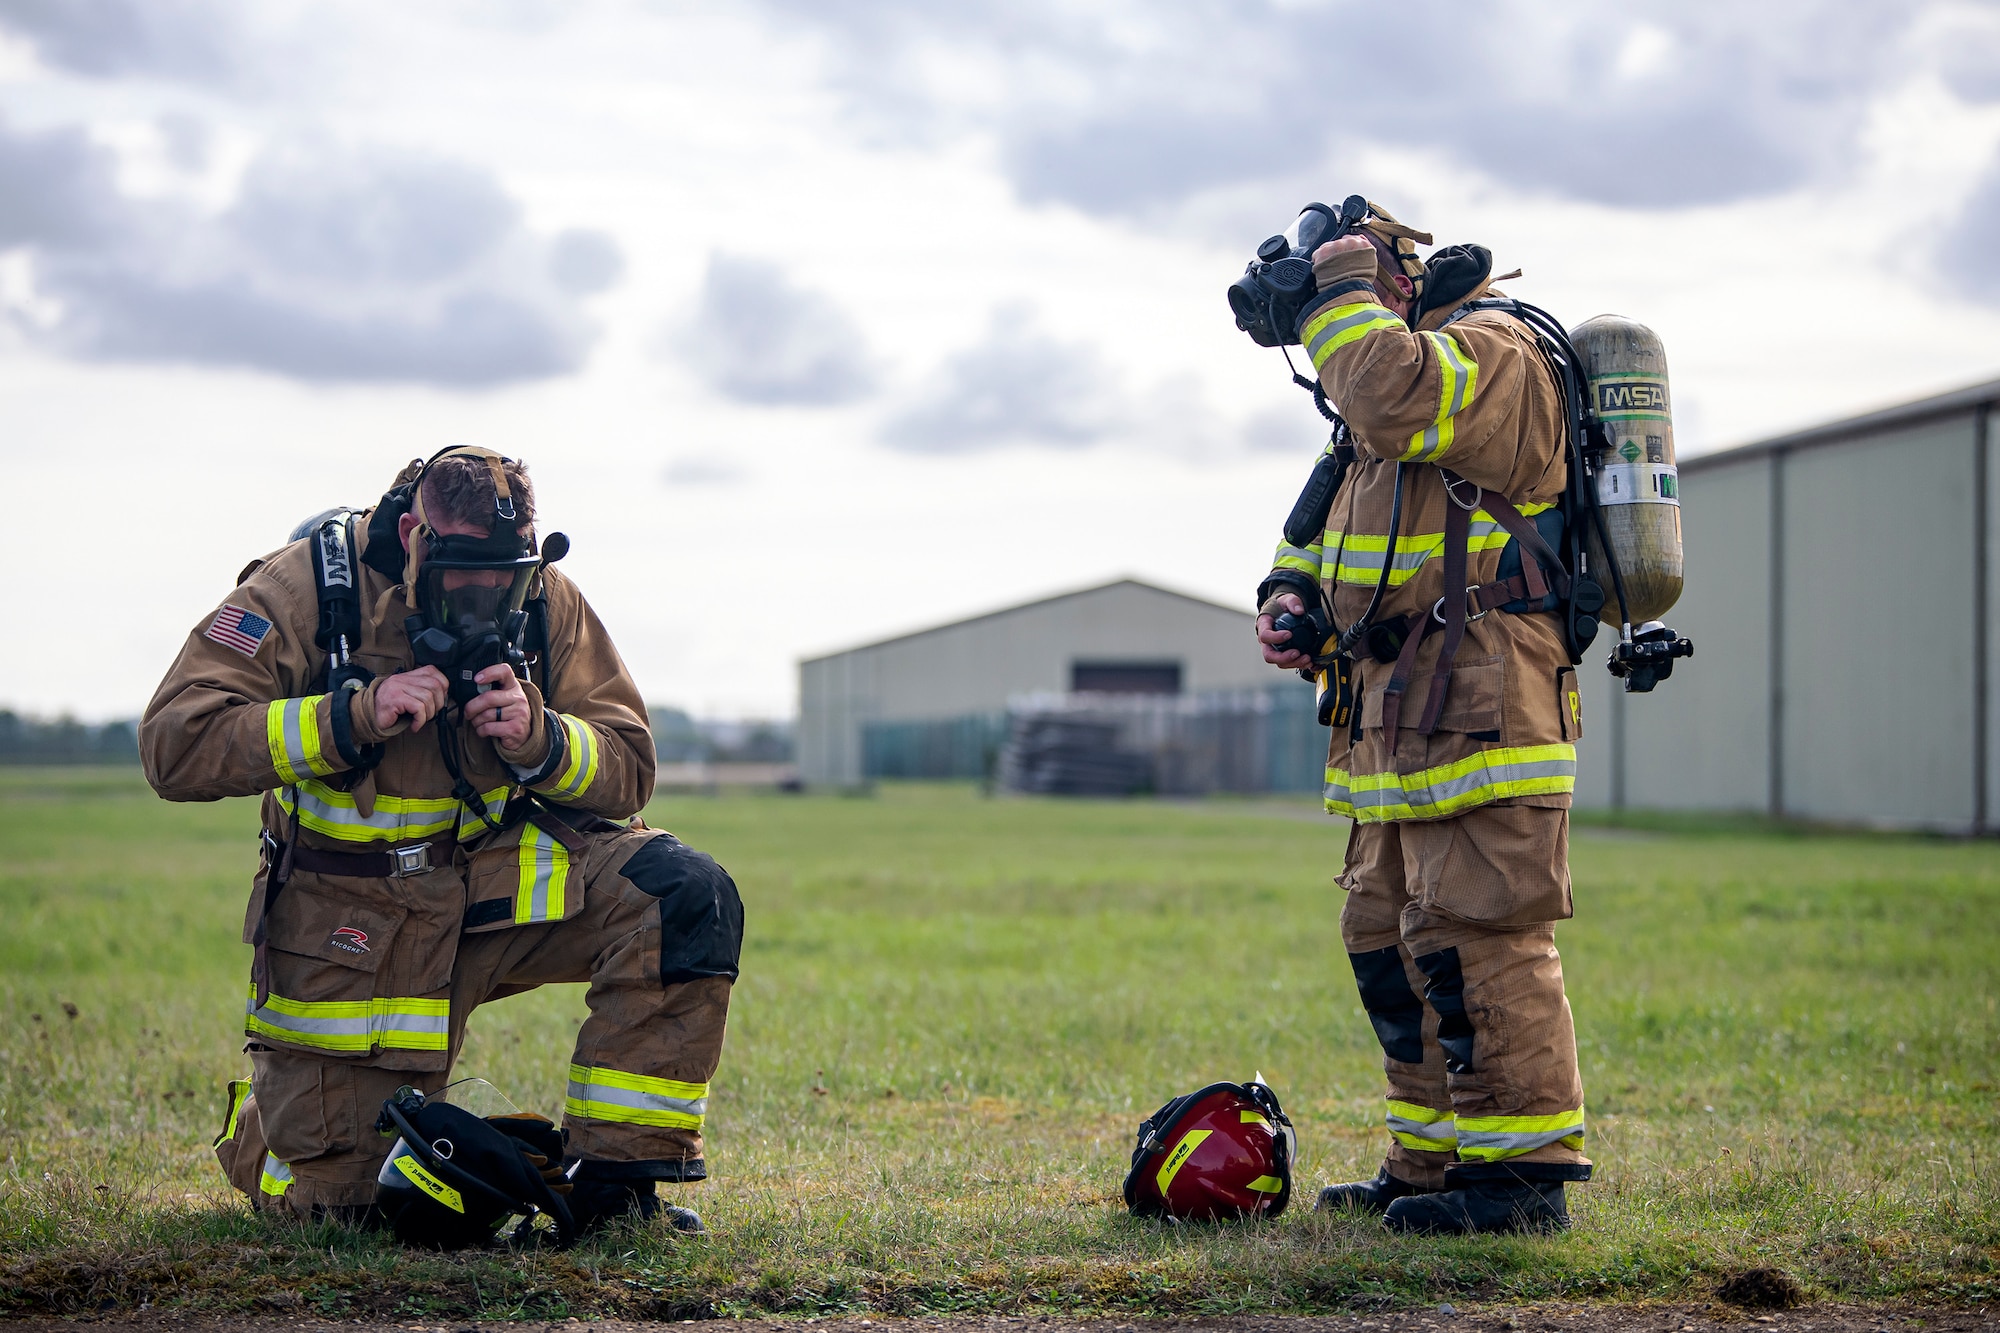 Firefighters from the 422d Fire Emergency Services take off their equipment following a live-fire training exercise at RAF Fairford, England, Oct. 3, 2022. Firefighters from the 422d FES, are required to complete live-fire training bi-annualy to test thief overall readiness and ability to properly extinguish an aircraft fire. (U.S. Air Force photo by Staff Sgt. Eugene Oliver)